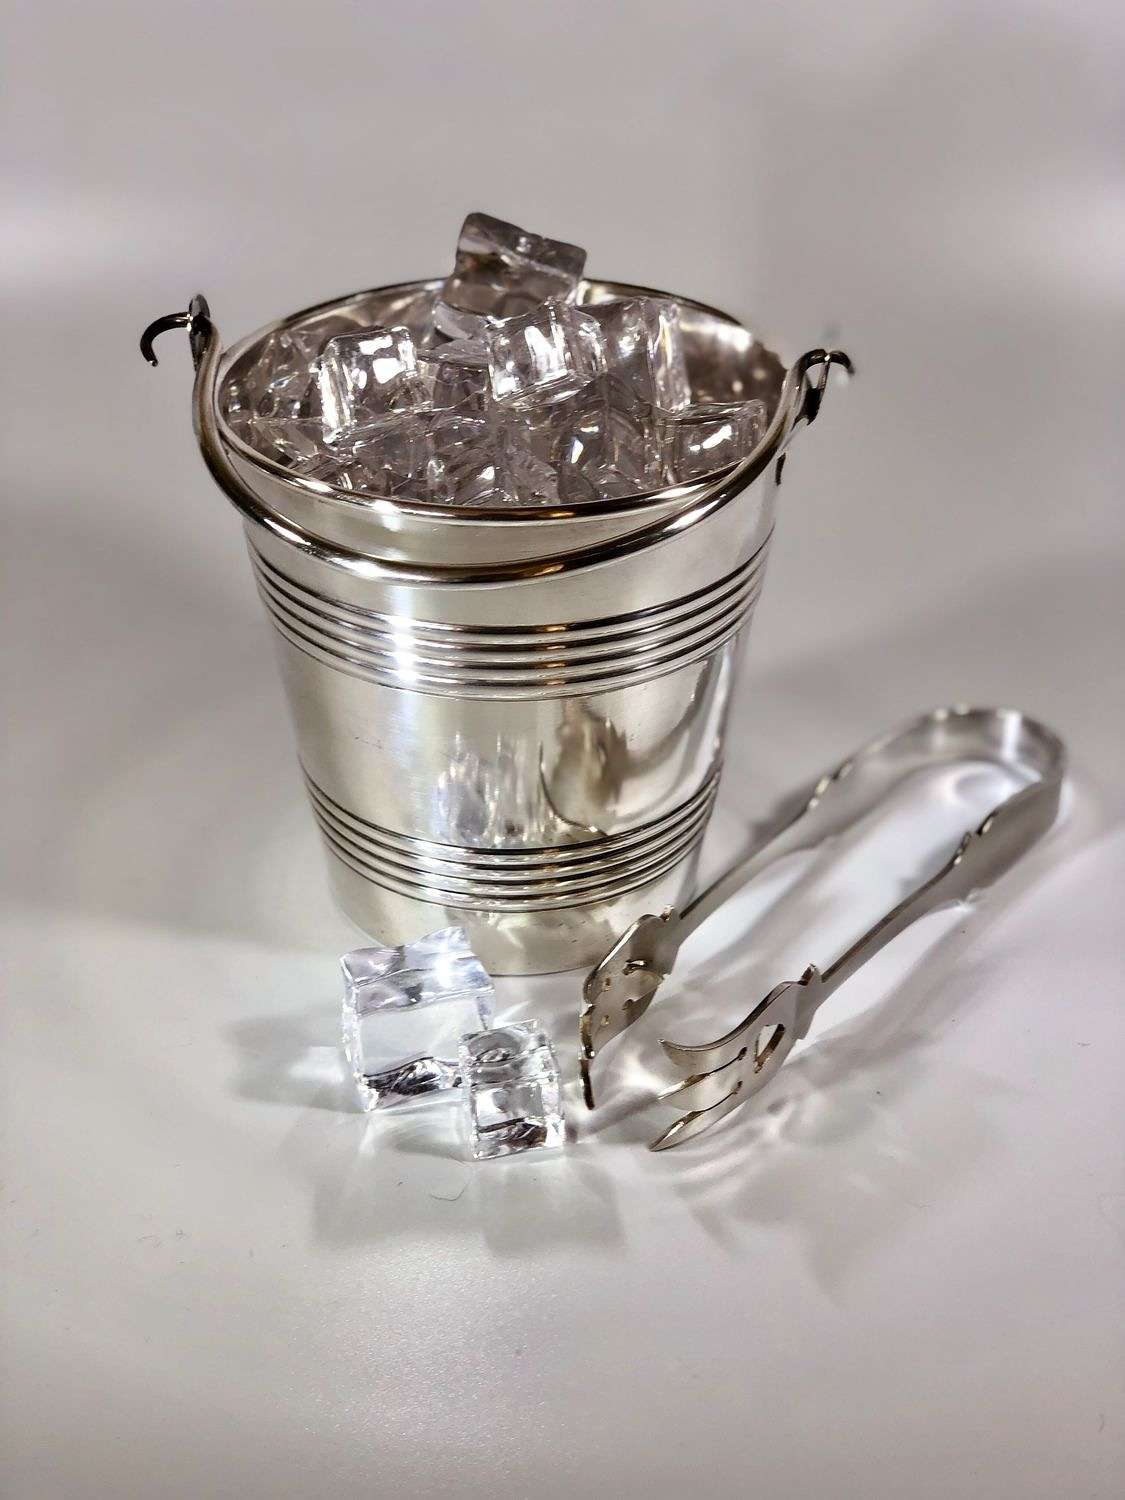 Wiskemann silver plated ice bucket and tongs